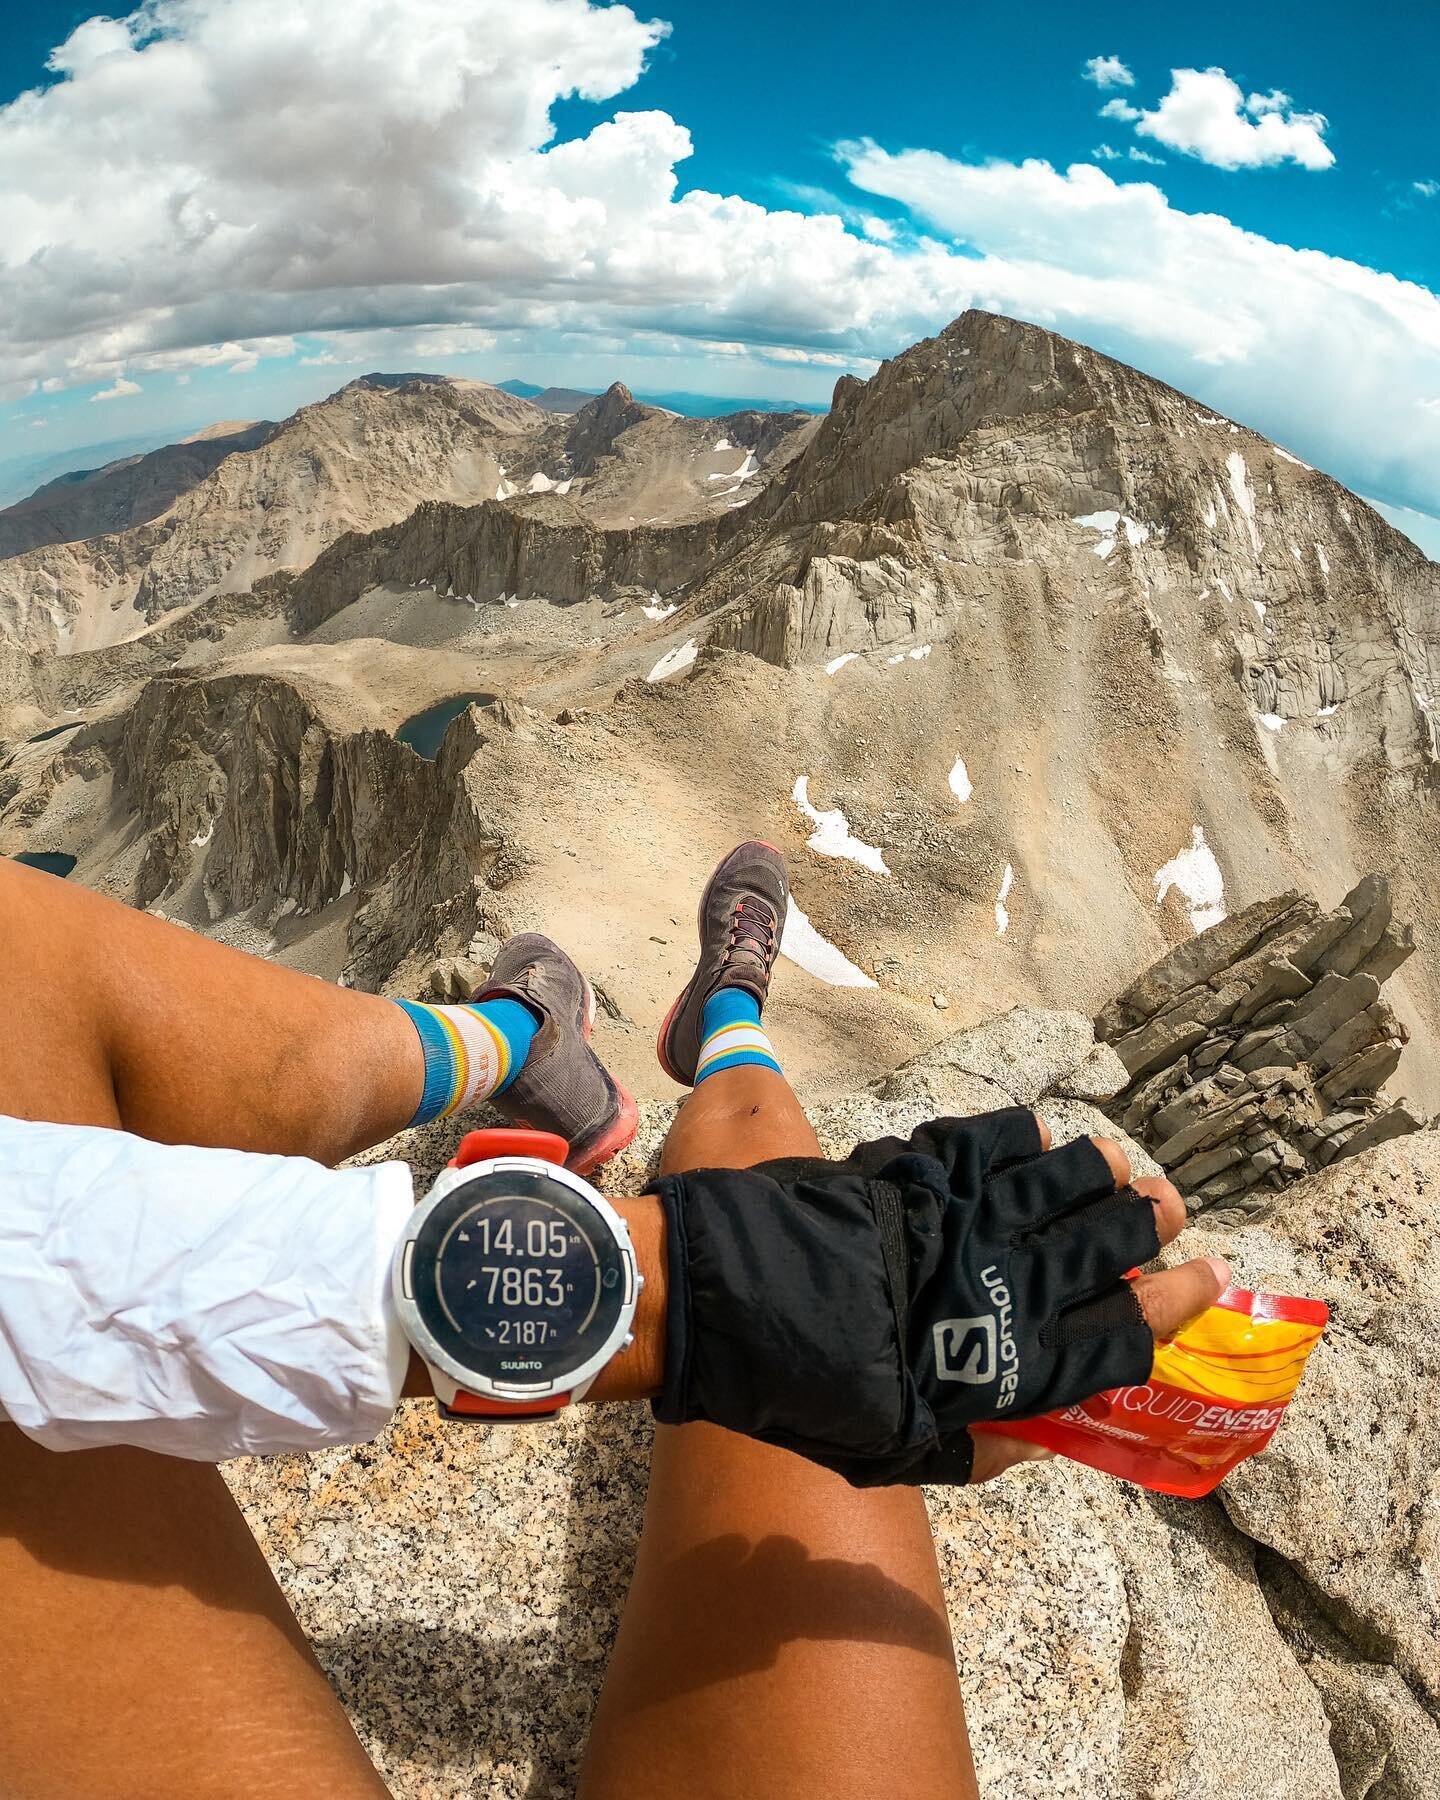 How can you tell when your watch is hungry? 
It goes back four seconds.
😬😂
View from Mt Russell over looking Mt Whitney, the peak we had just been on. One helluva day- my legs had a good mountains hangover the next day!
🦵🏽🥴🥵😴😍🤩🤪

#timetopla